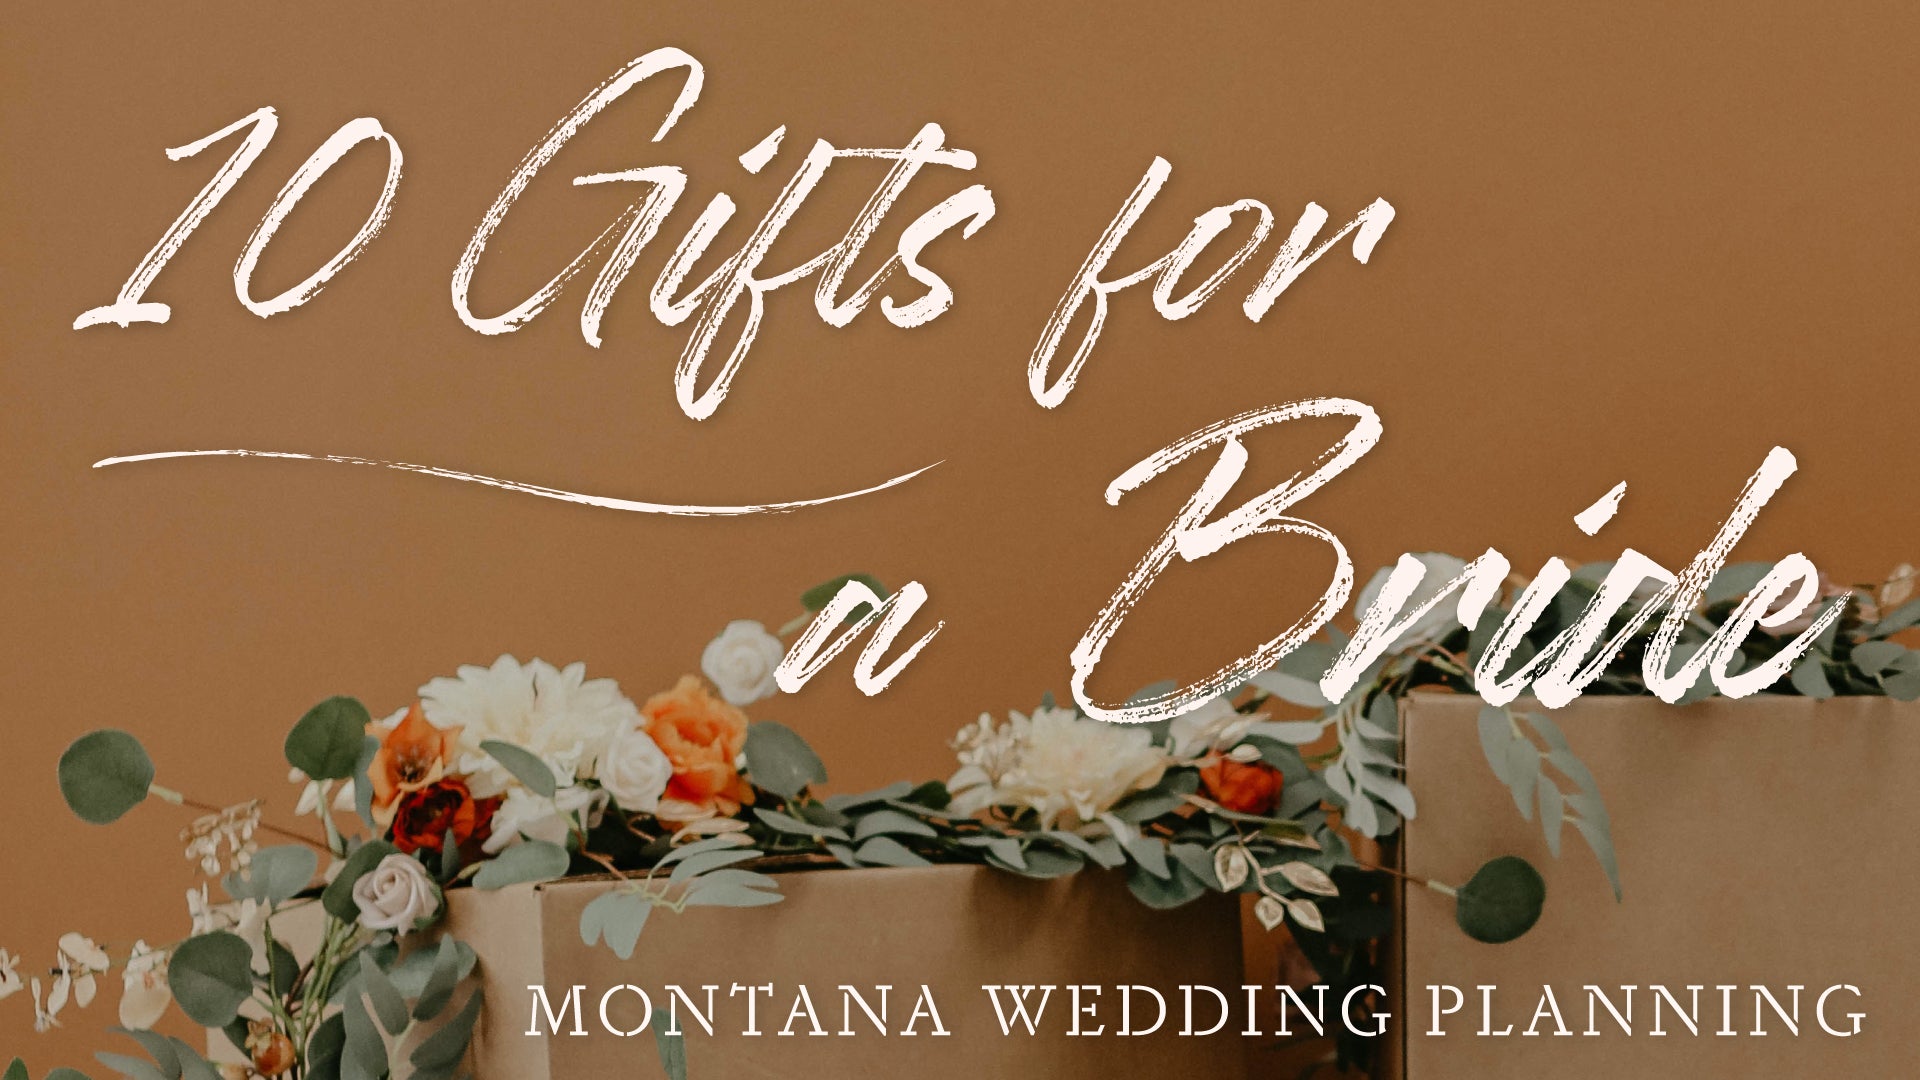 Montana Wedding Planning: 10 Gifts for a Bride